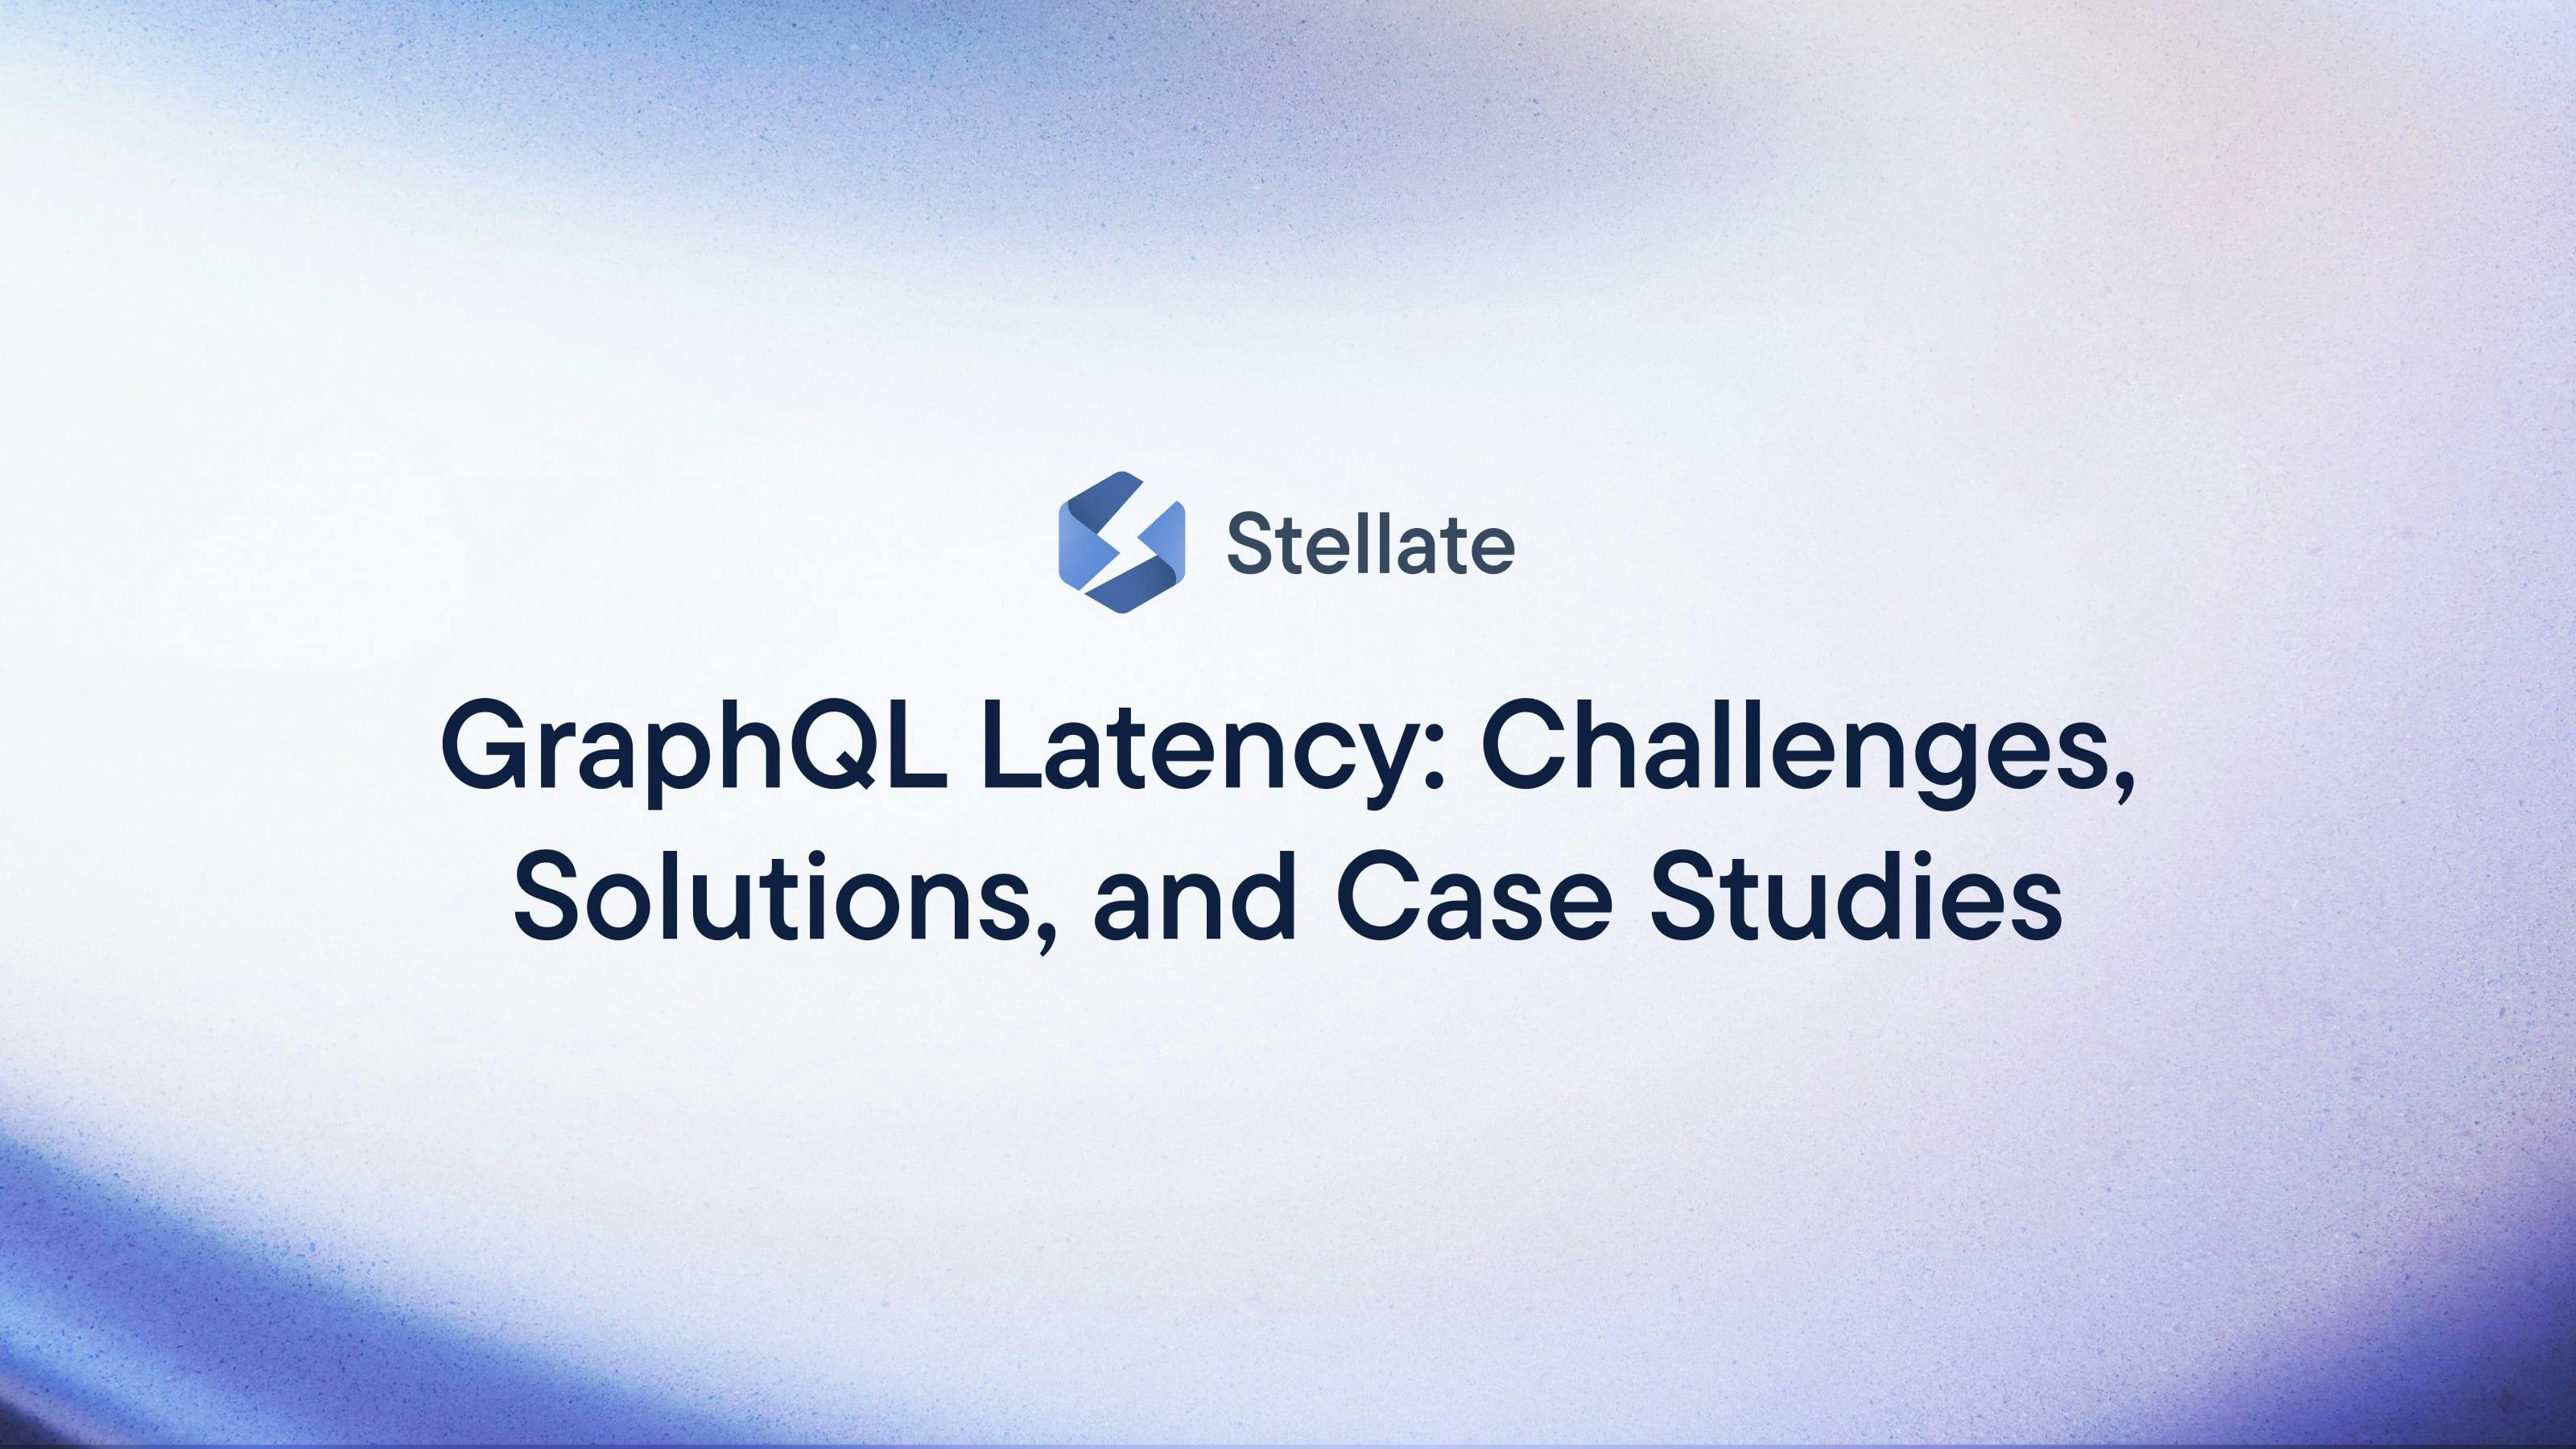 GraphQL Latency: Challenges, Solutions, and Case Studies